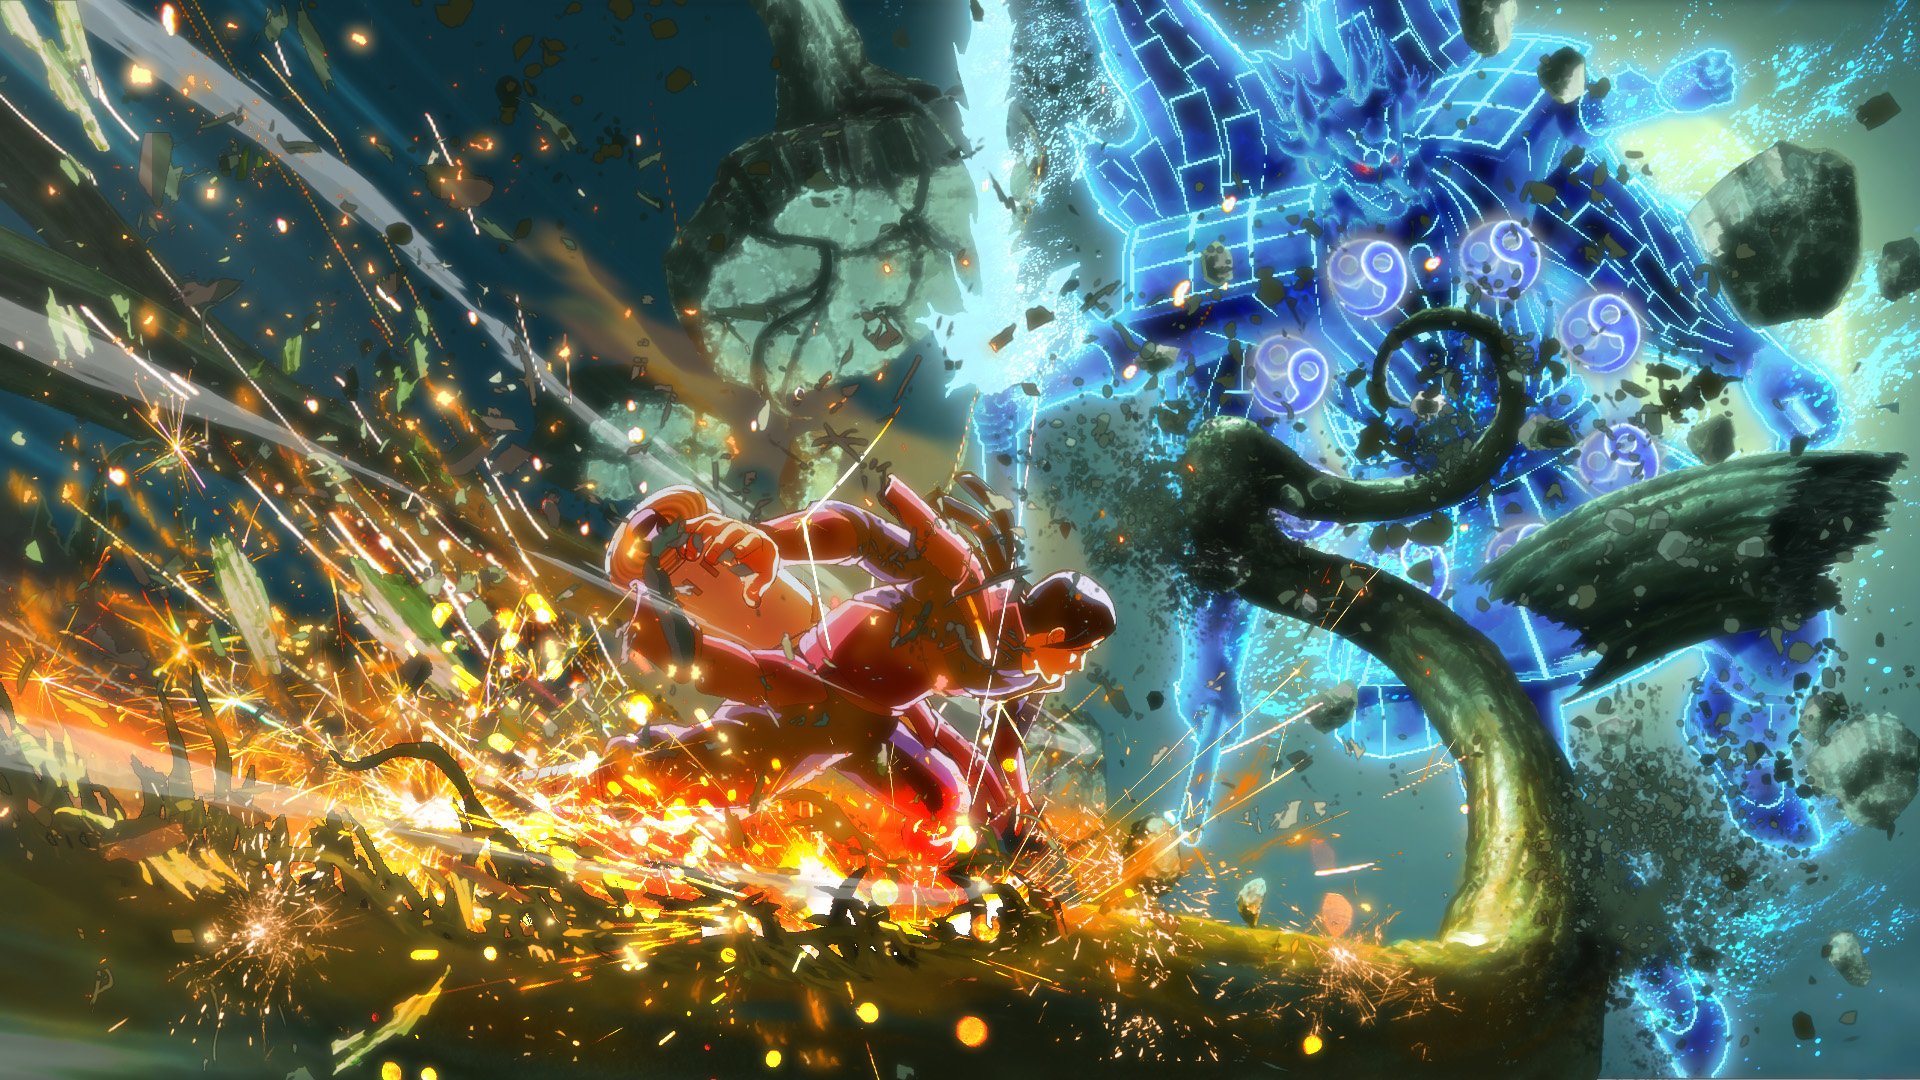 Naruto Shippuden Ultimate Ninja Storm 4 Story Mode To Feature Actual Cuts  From The Anime